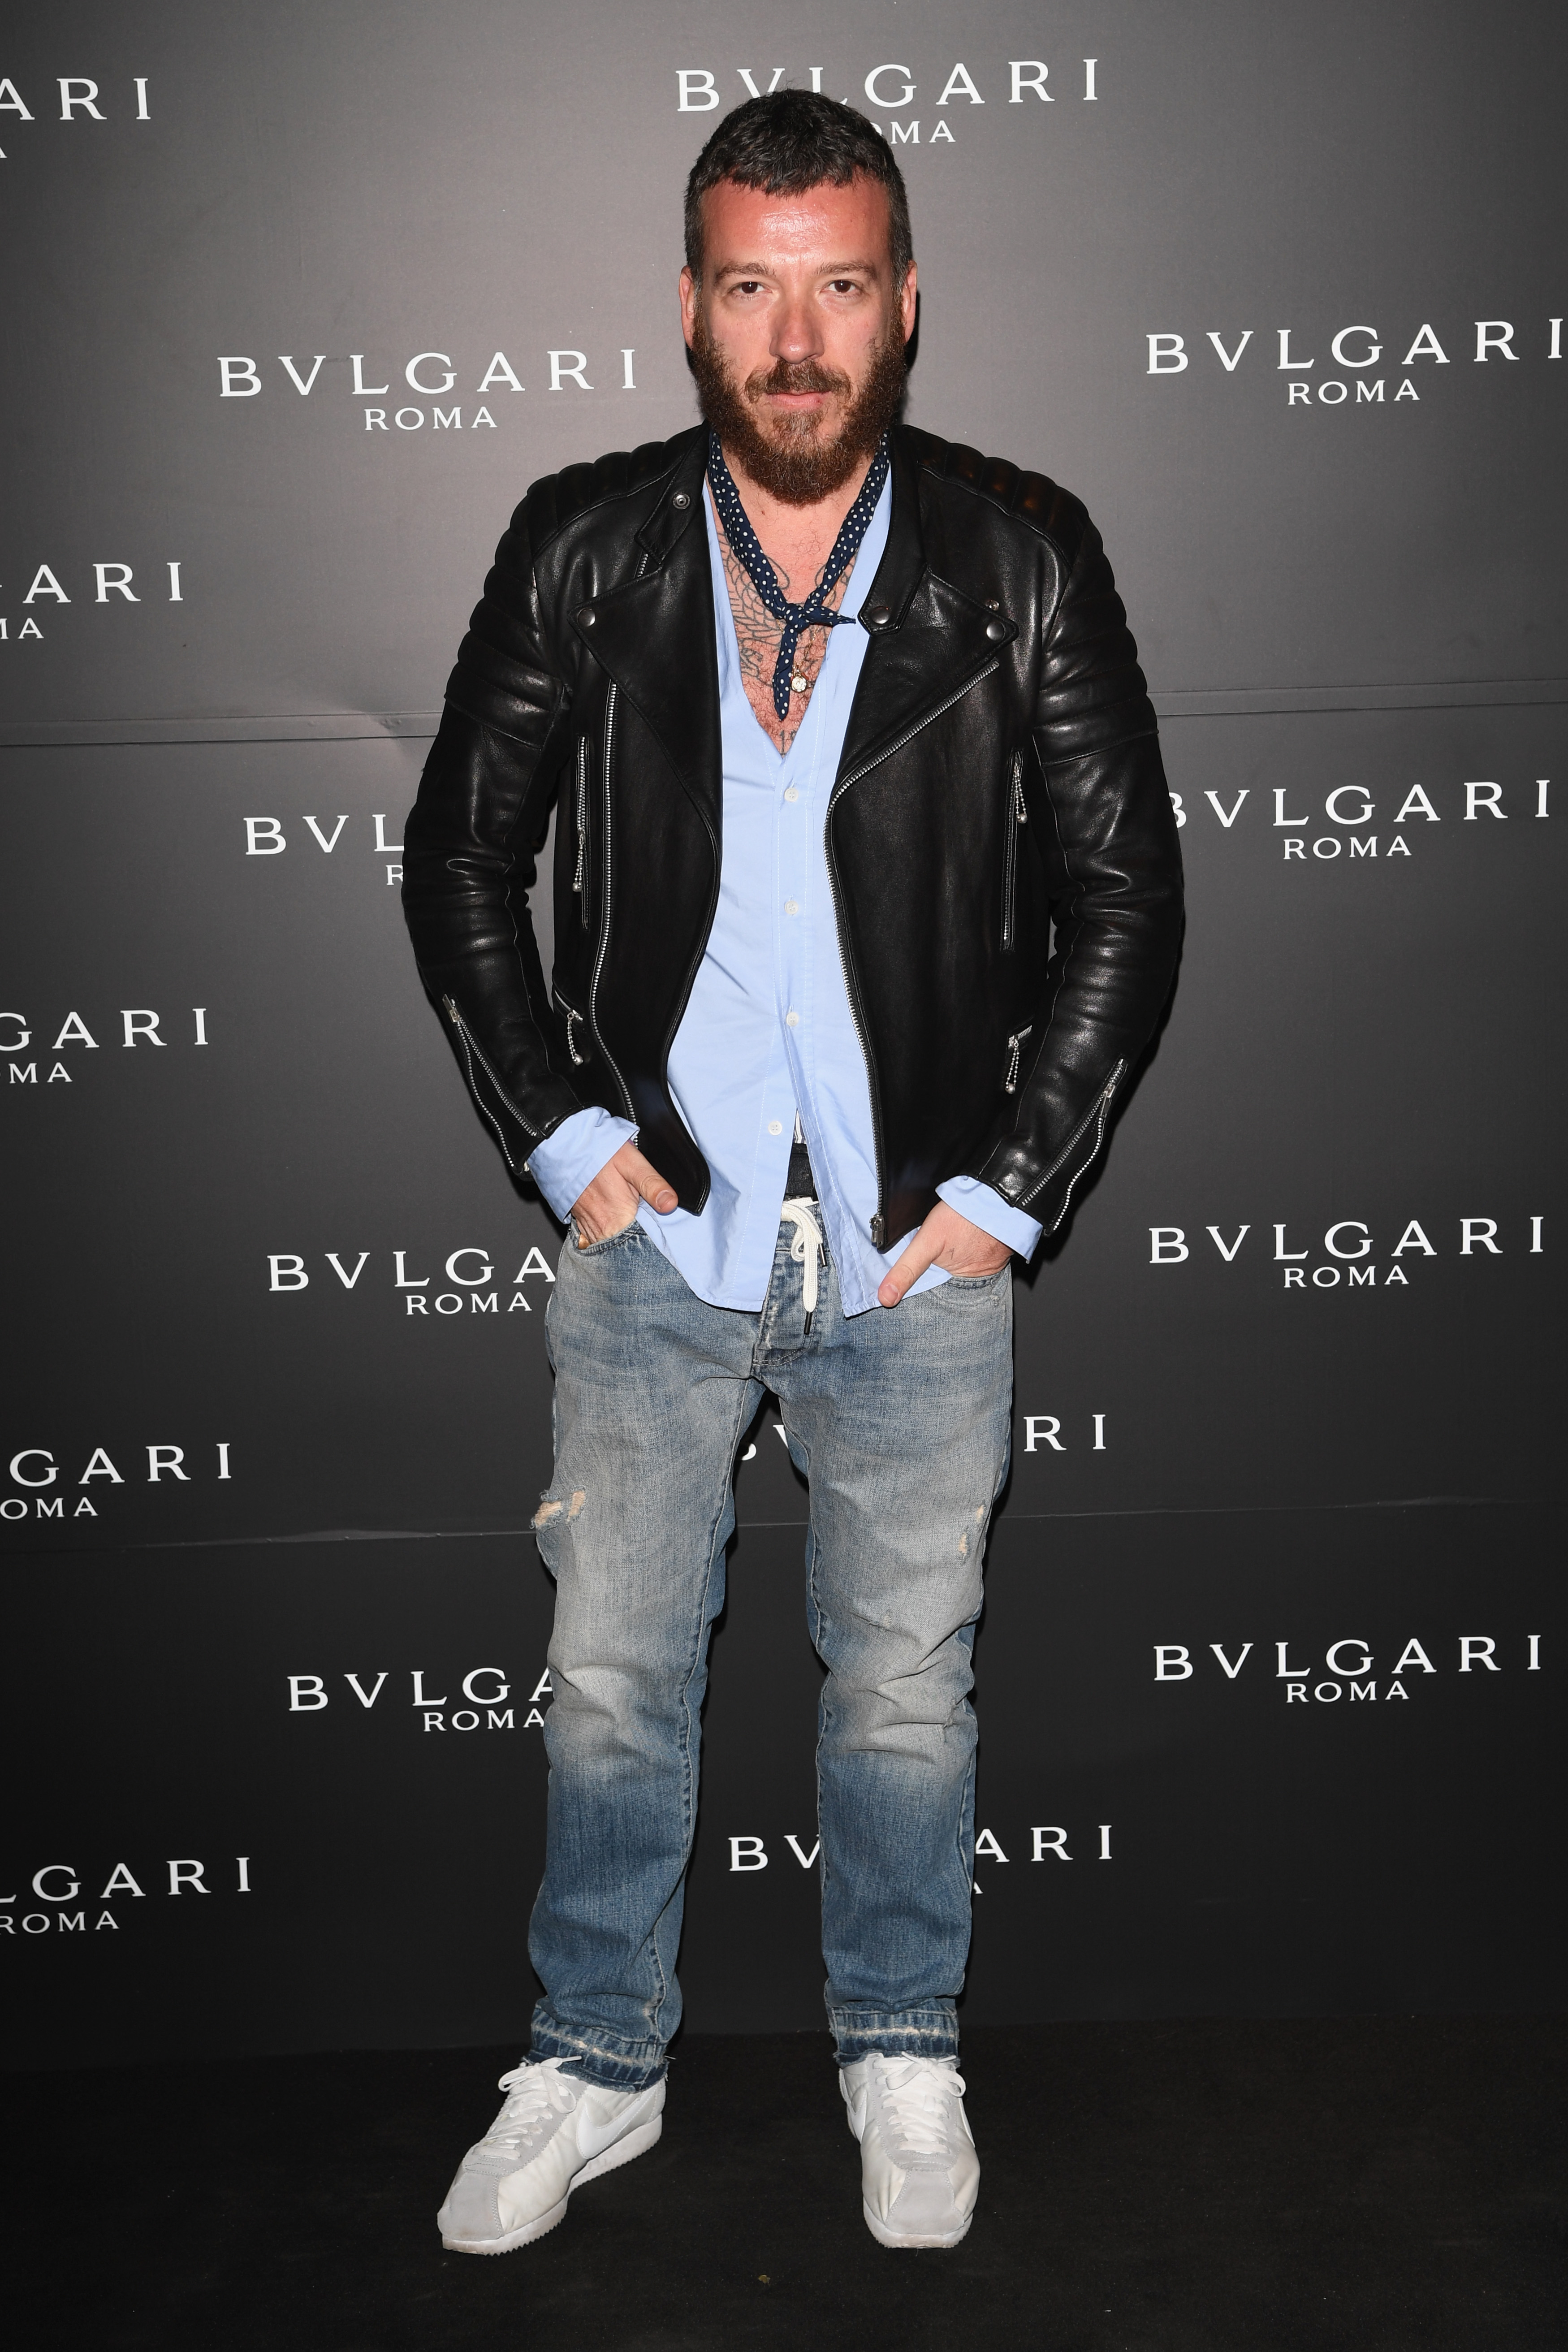 MILAN, ITALY - APRIL 12:  Andrea Pompilio attends BVLGARI Celebration of B.Zero1 At Milan Design Week at Hotel Bulgari on April 12, 2016 in Milan, Italy.  (Photo by Venturelli/Getty Images for BVLGARI) *** Local Caption *** Andrea Pompilio